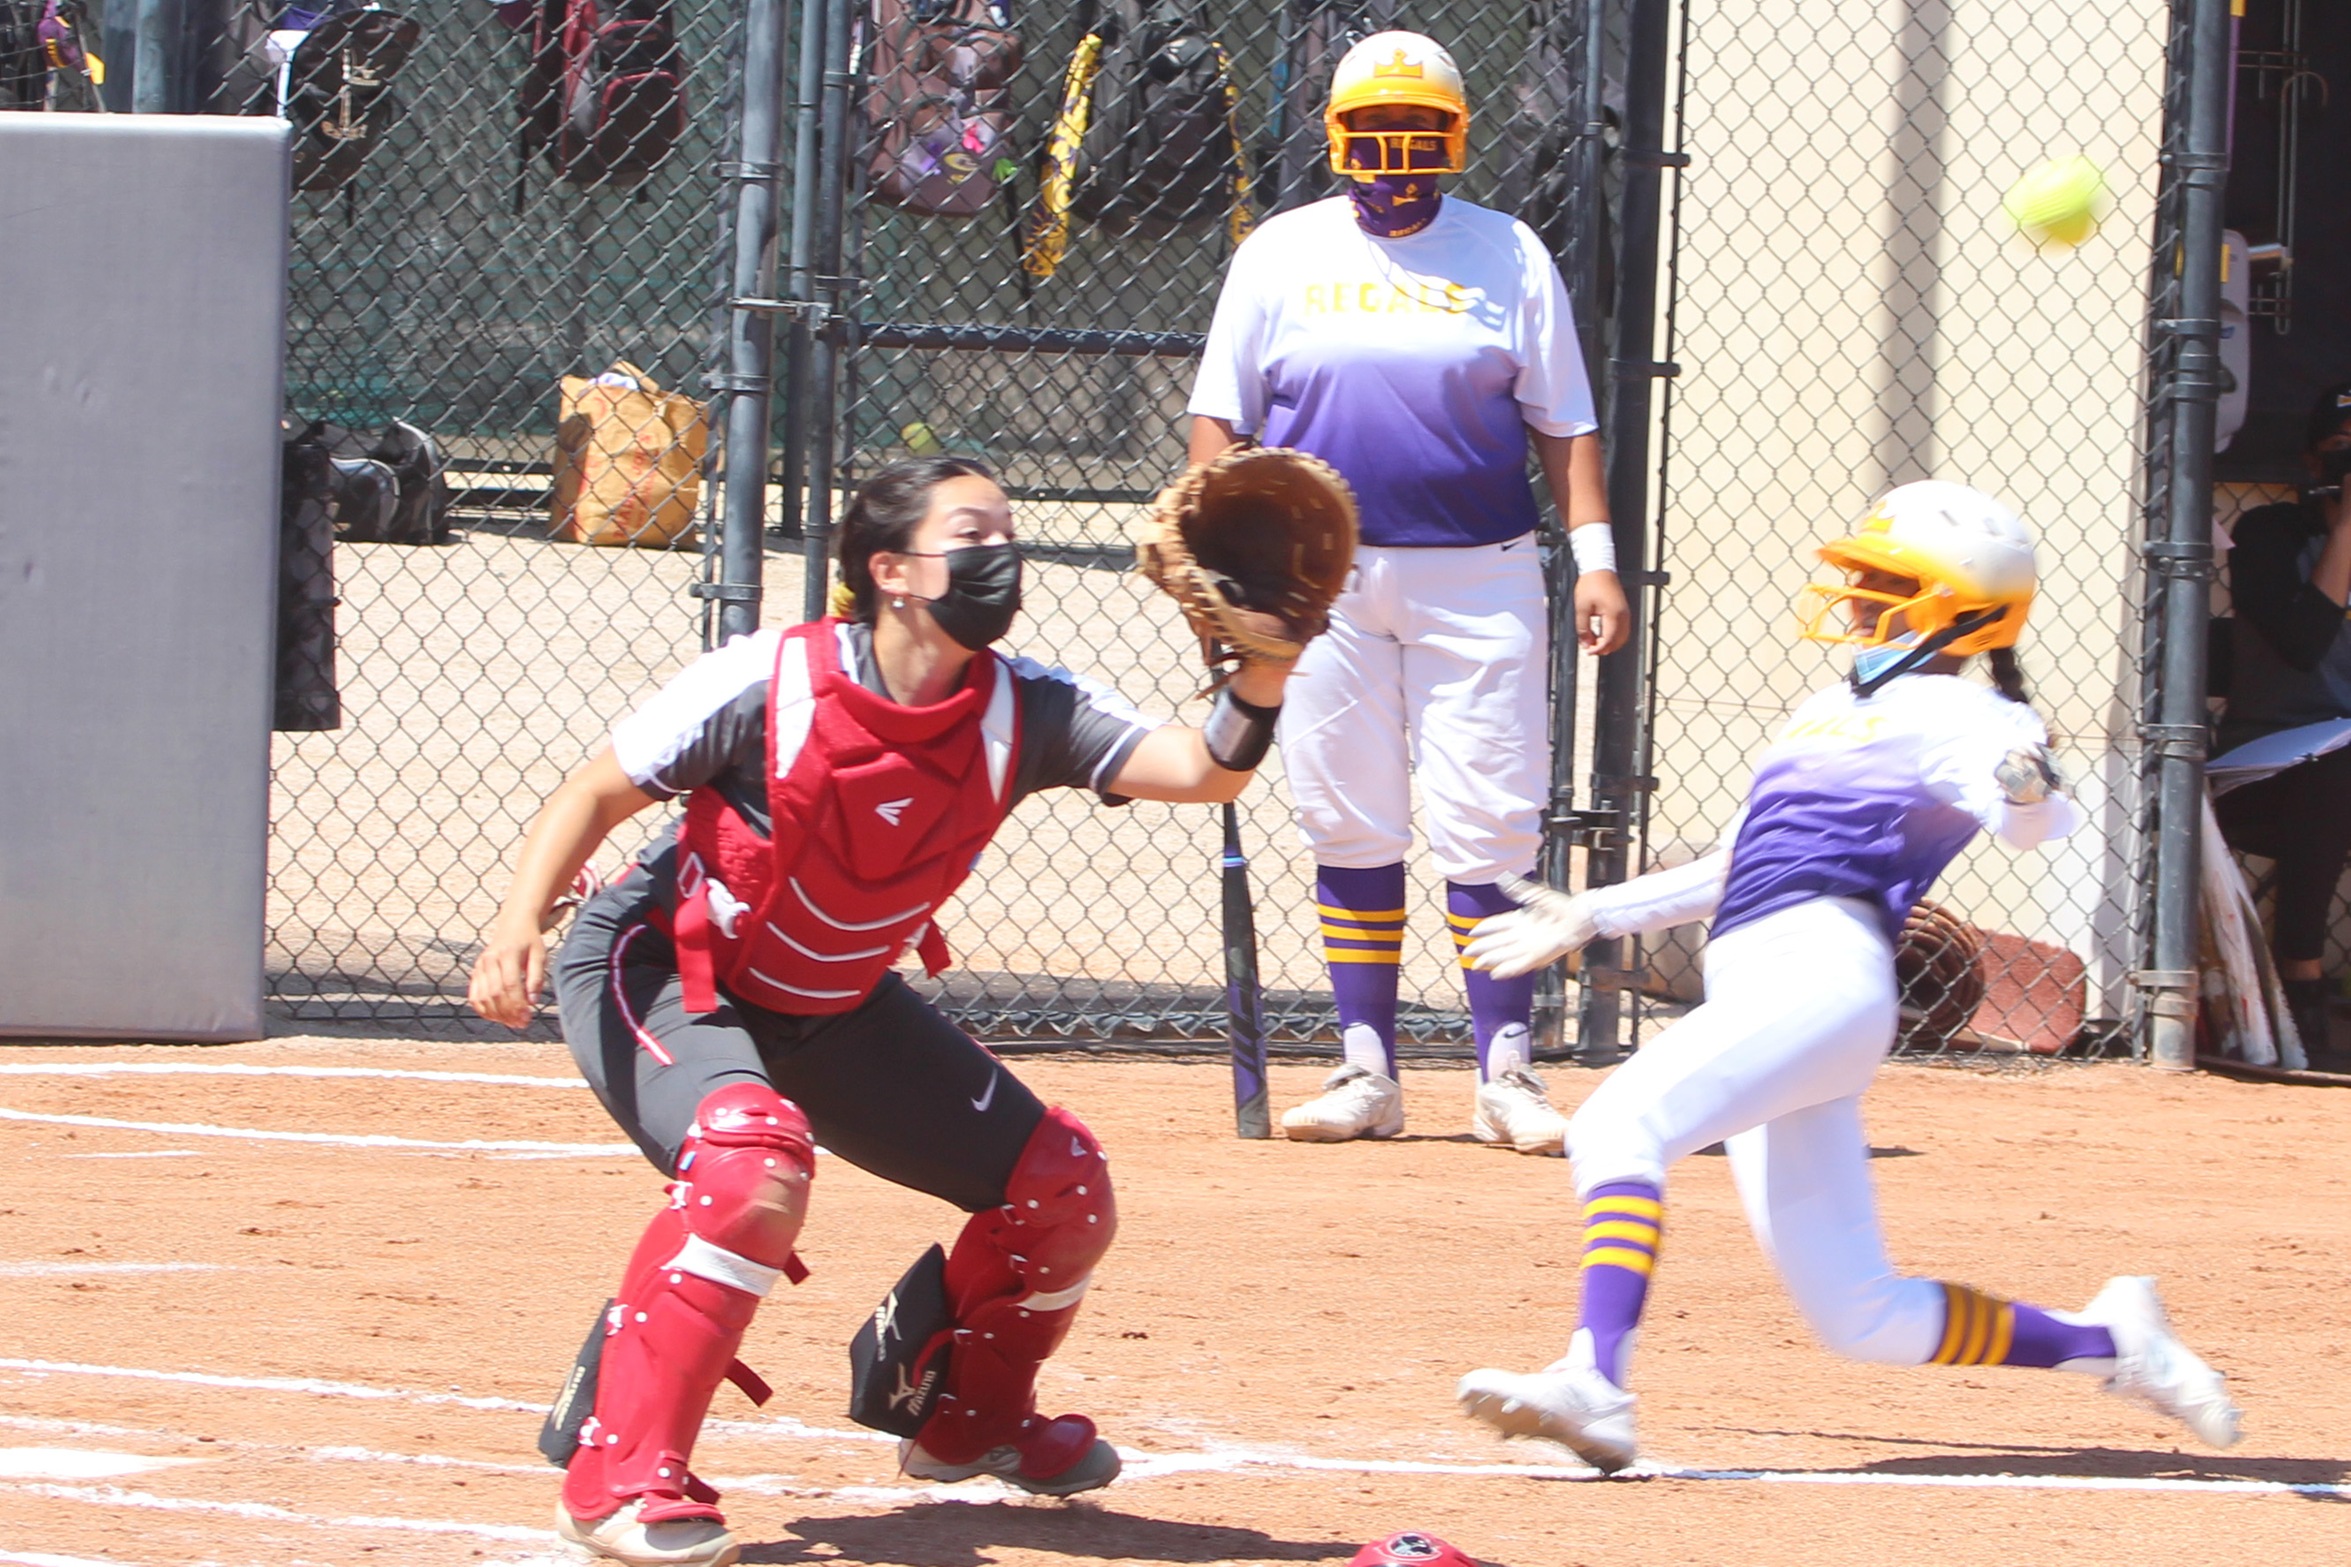 Ashley Membrere showed her speed with an inside-the-park home run.